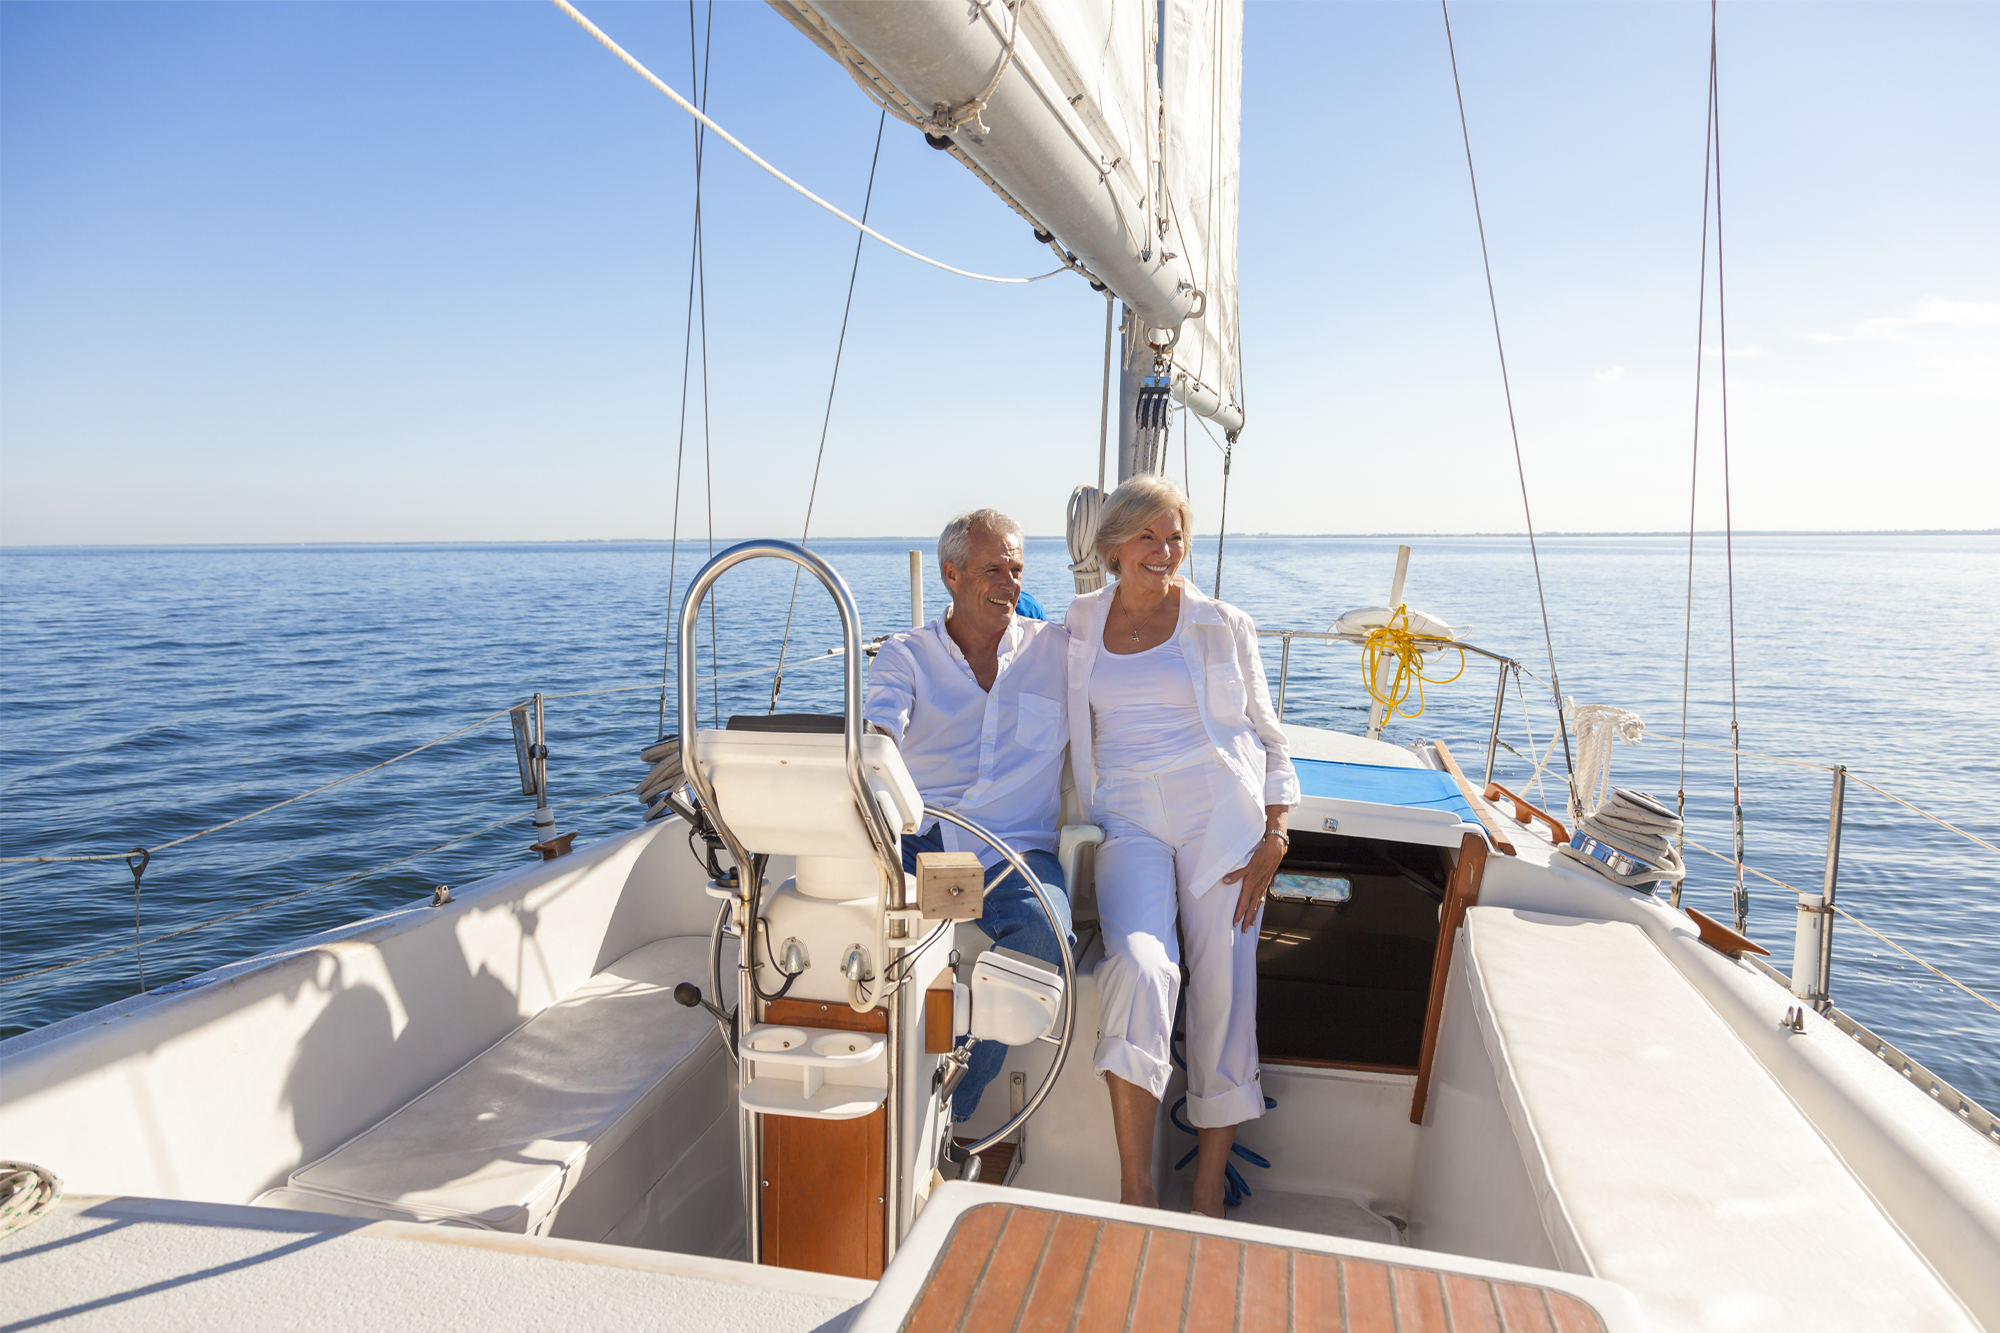 Retired couple smiling on a sailboat